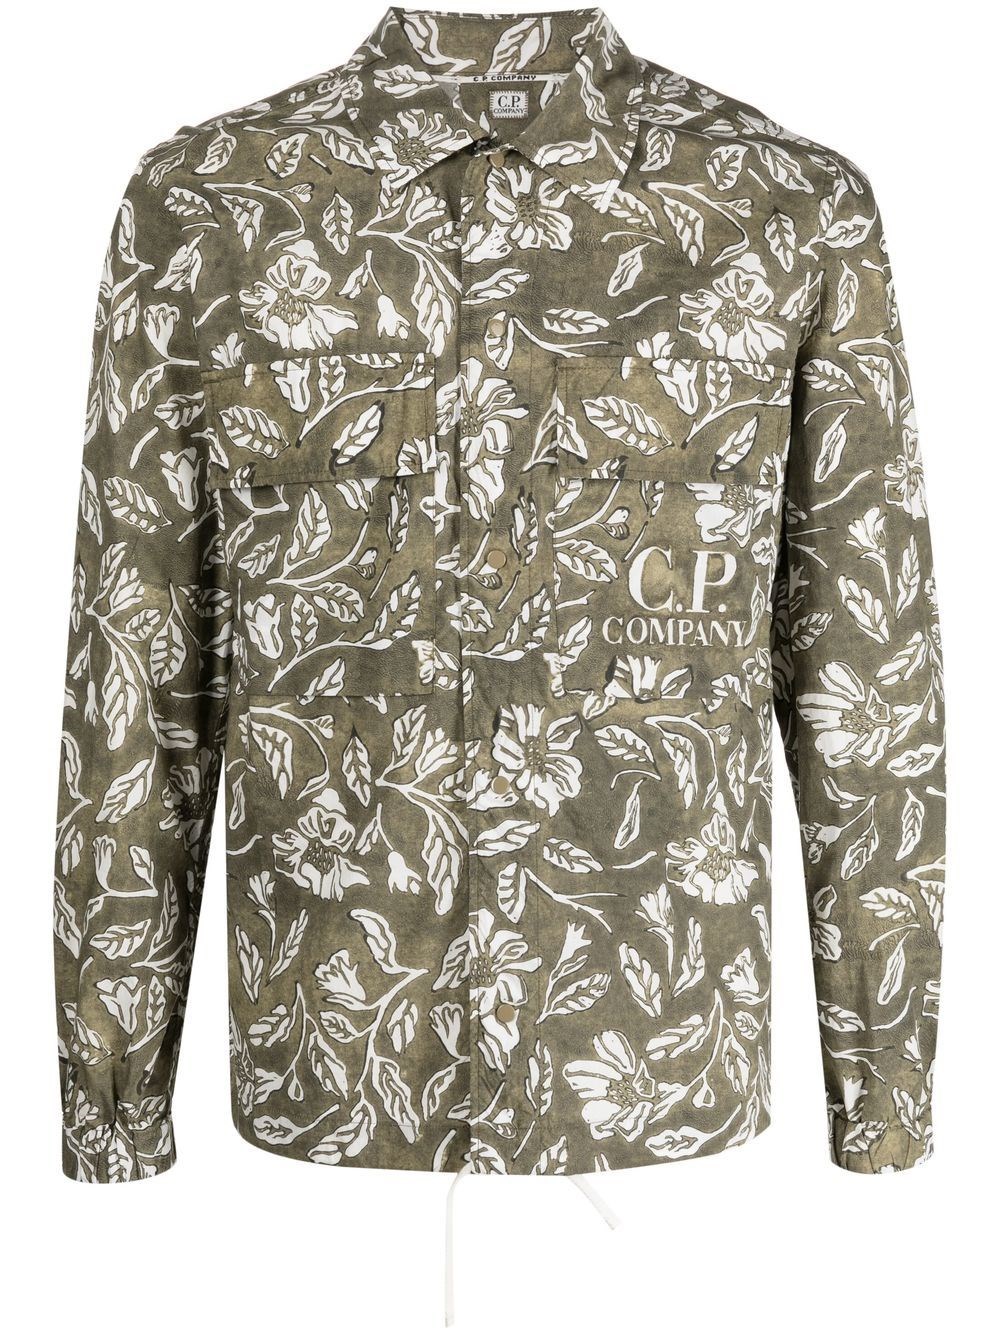 C.P. COMPANY ALL-OVER PRINTED POPELINE SHIRT